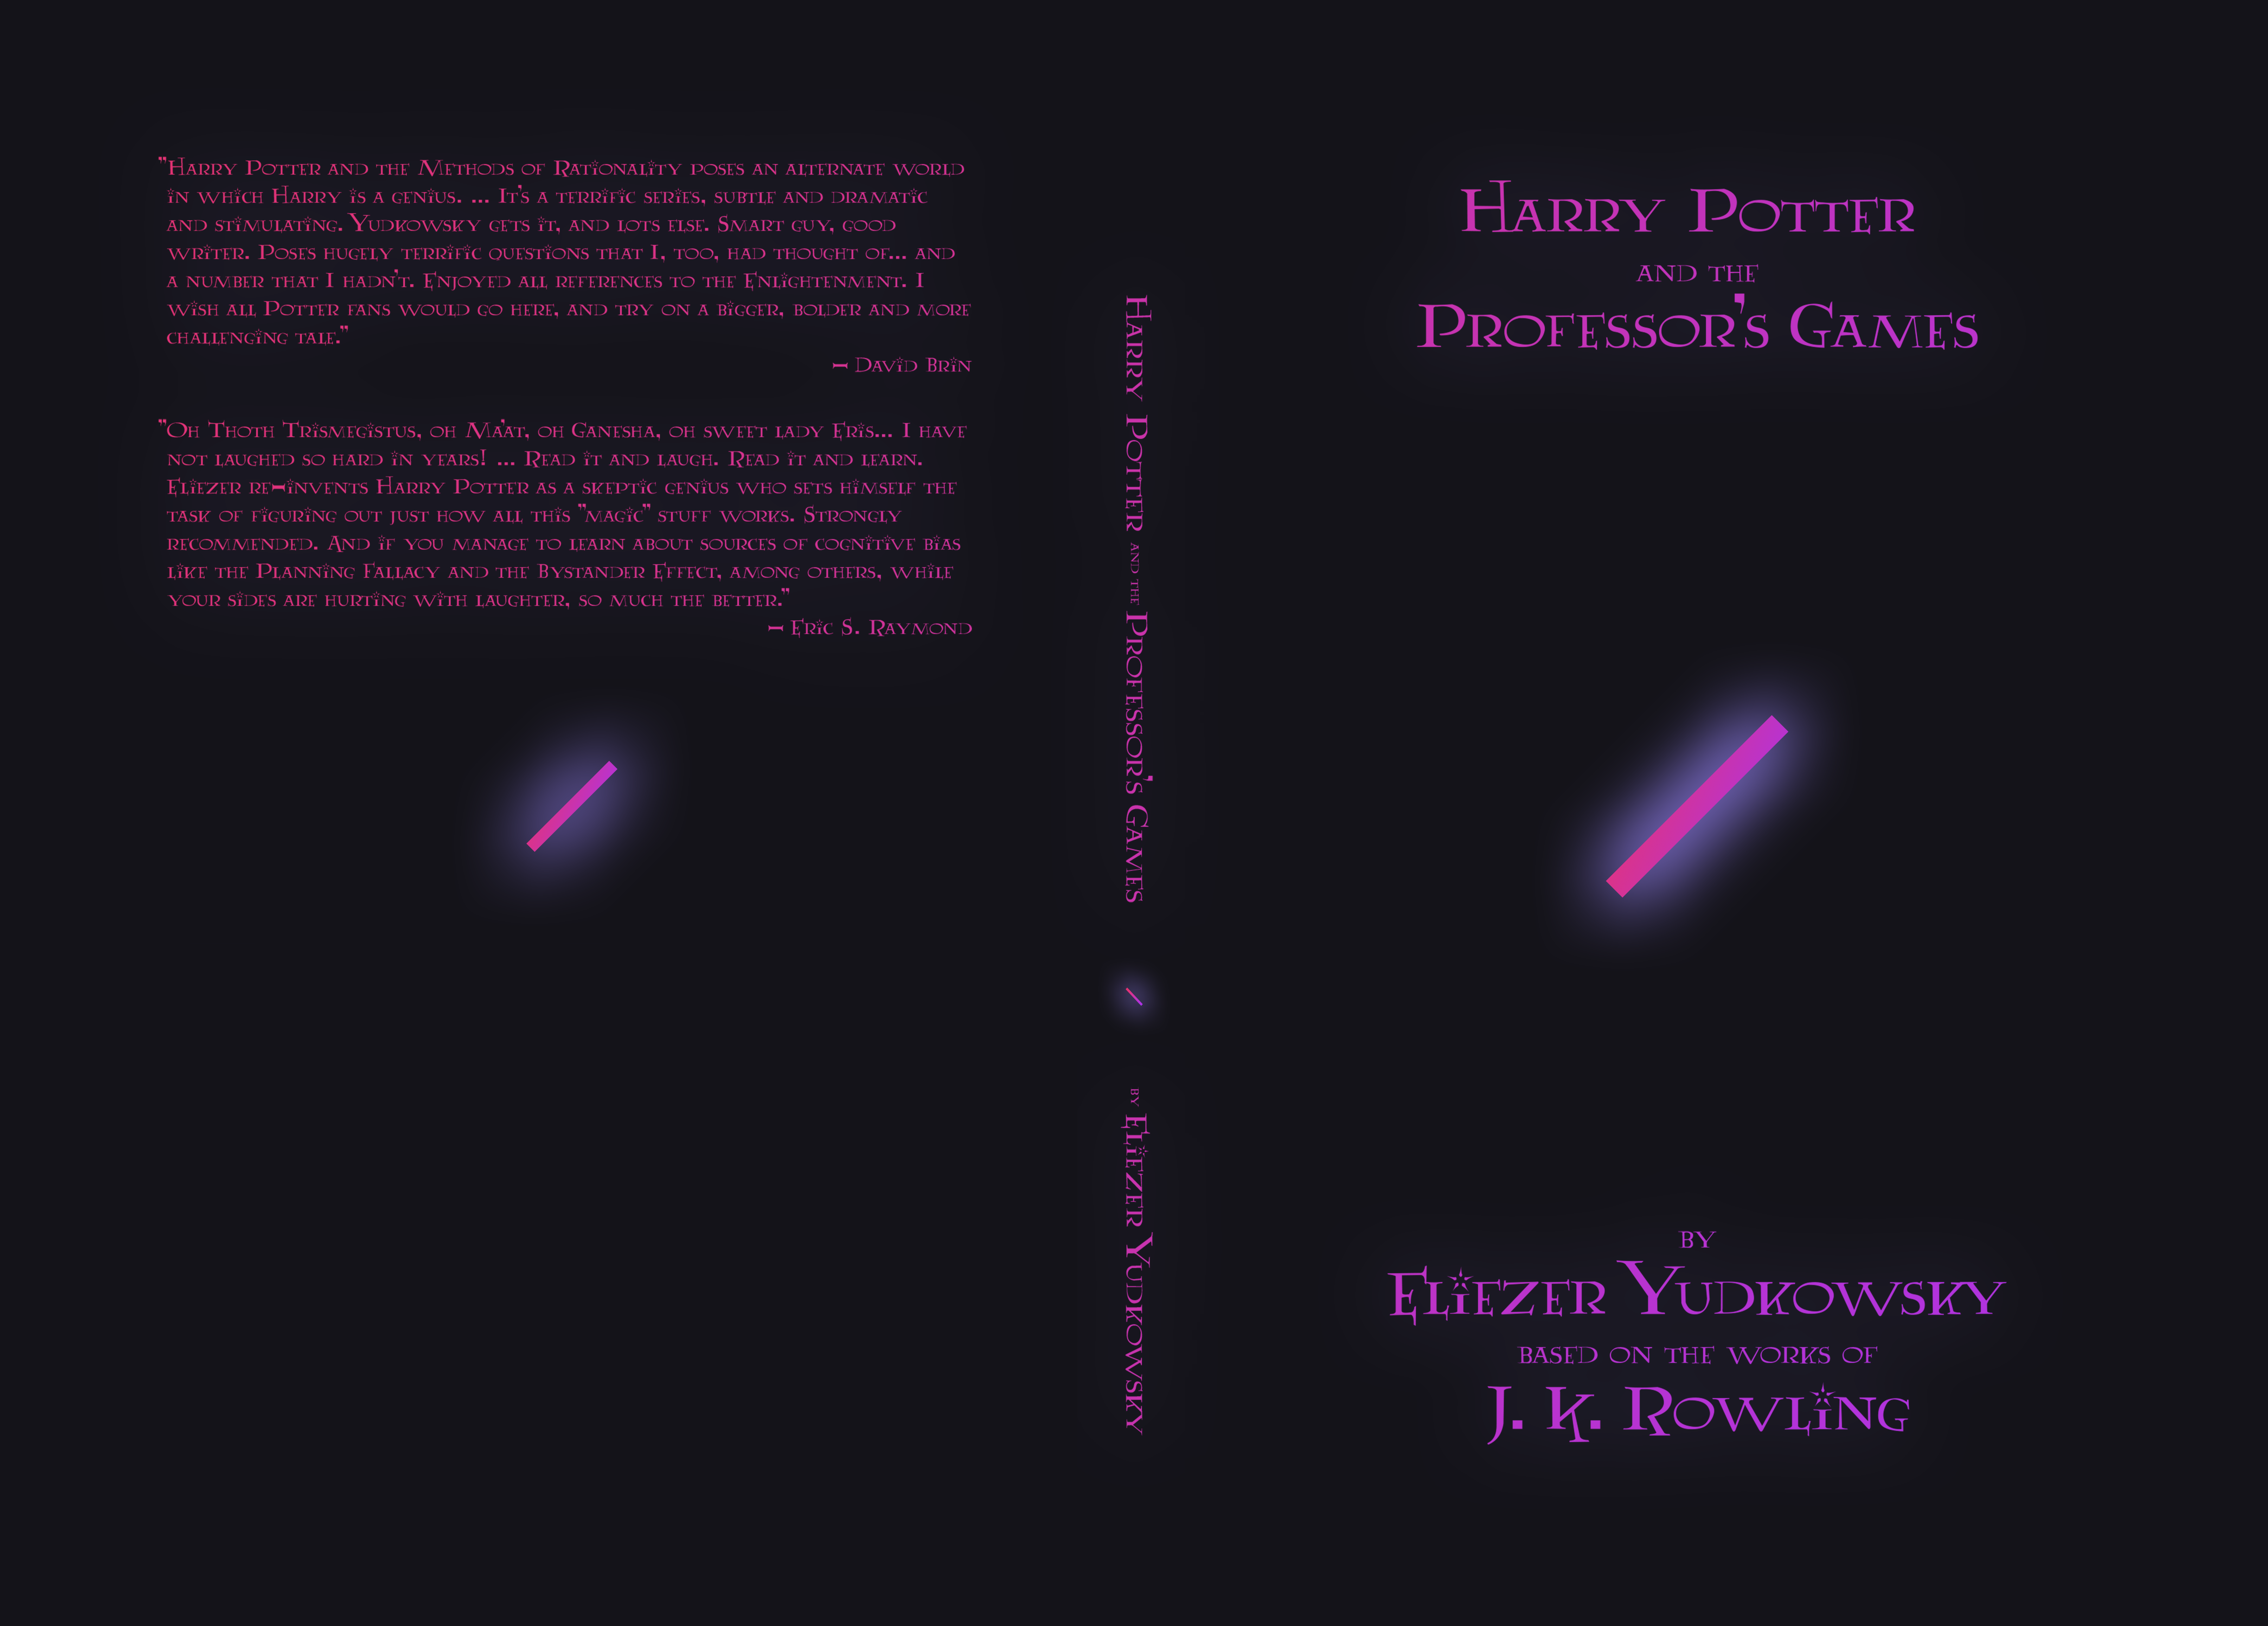 Volume 2: Harry Potter and the Professor's Games